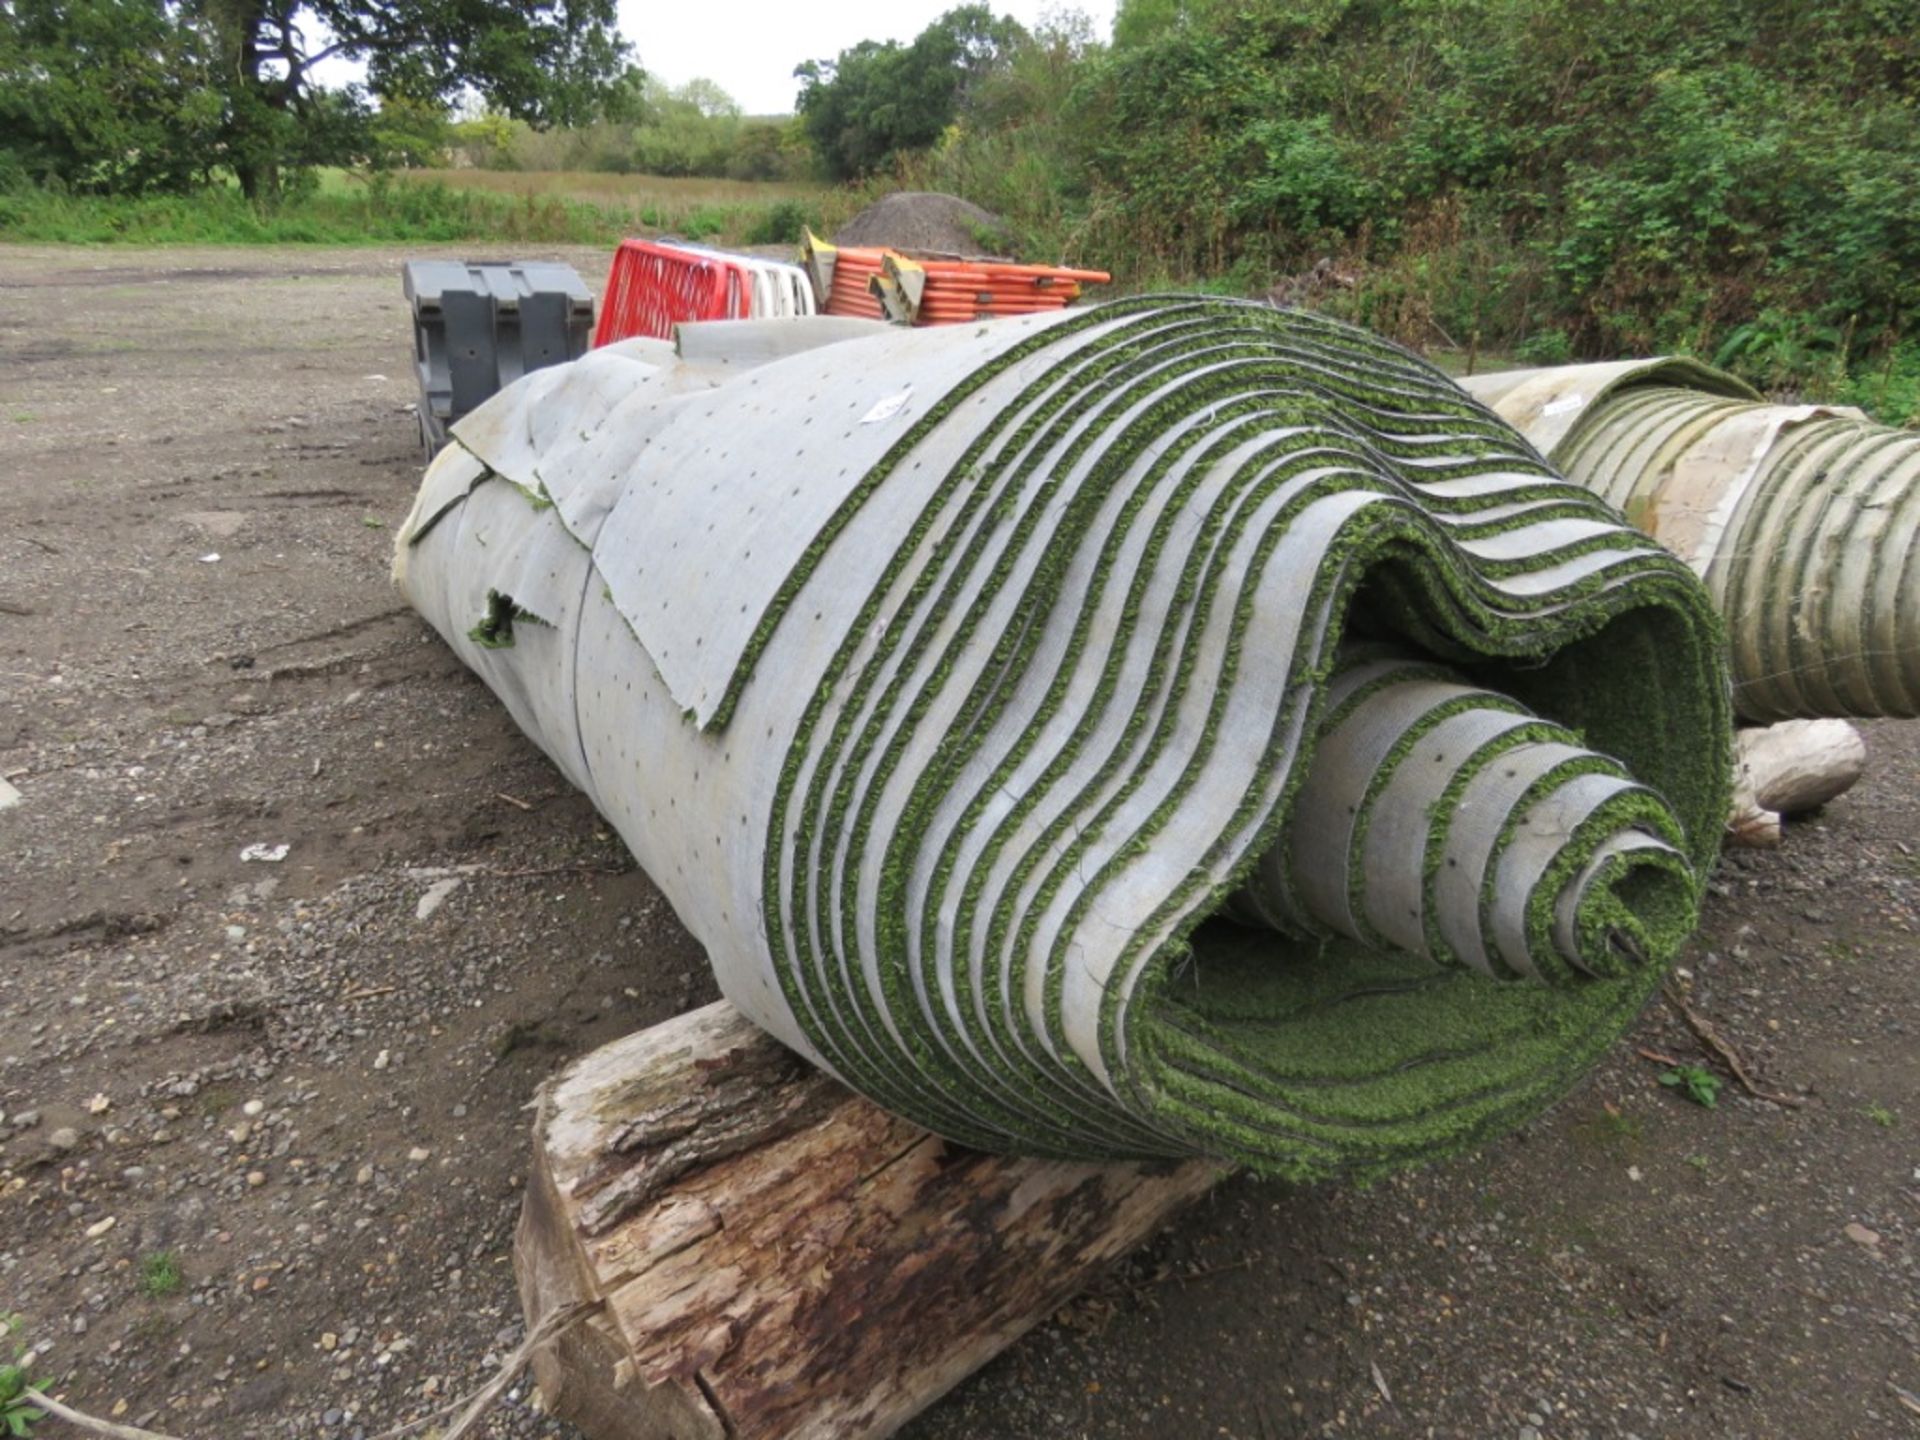 LARGE ROLL OF PRE USED ASTRO SPORTS TURF, 4M WIDTH X 50M LENGTH APPROX.